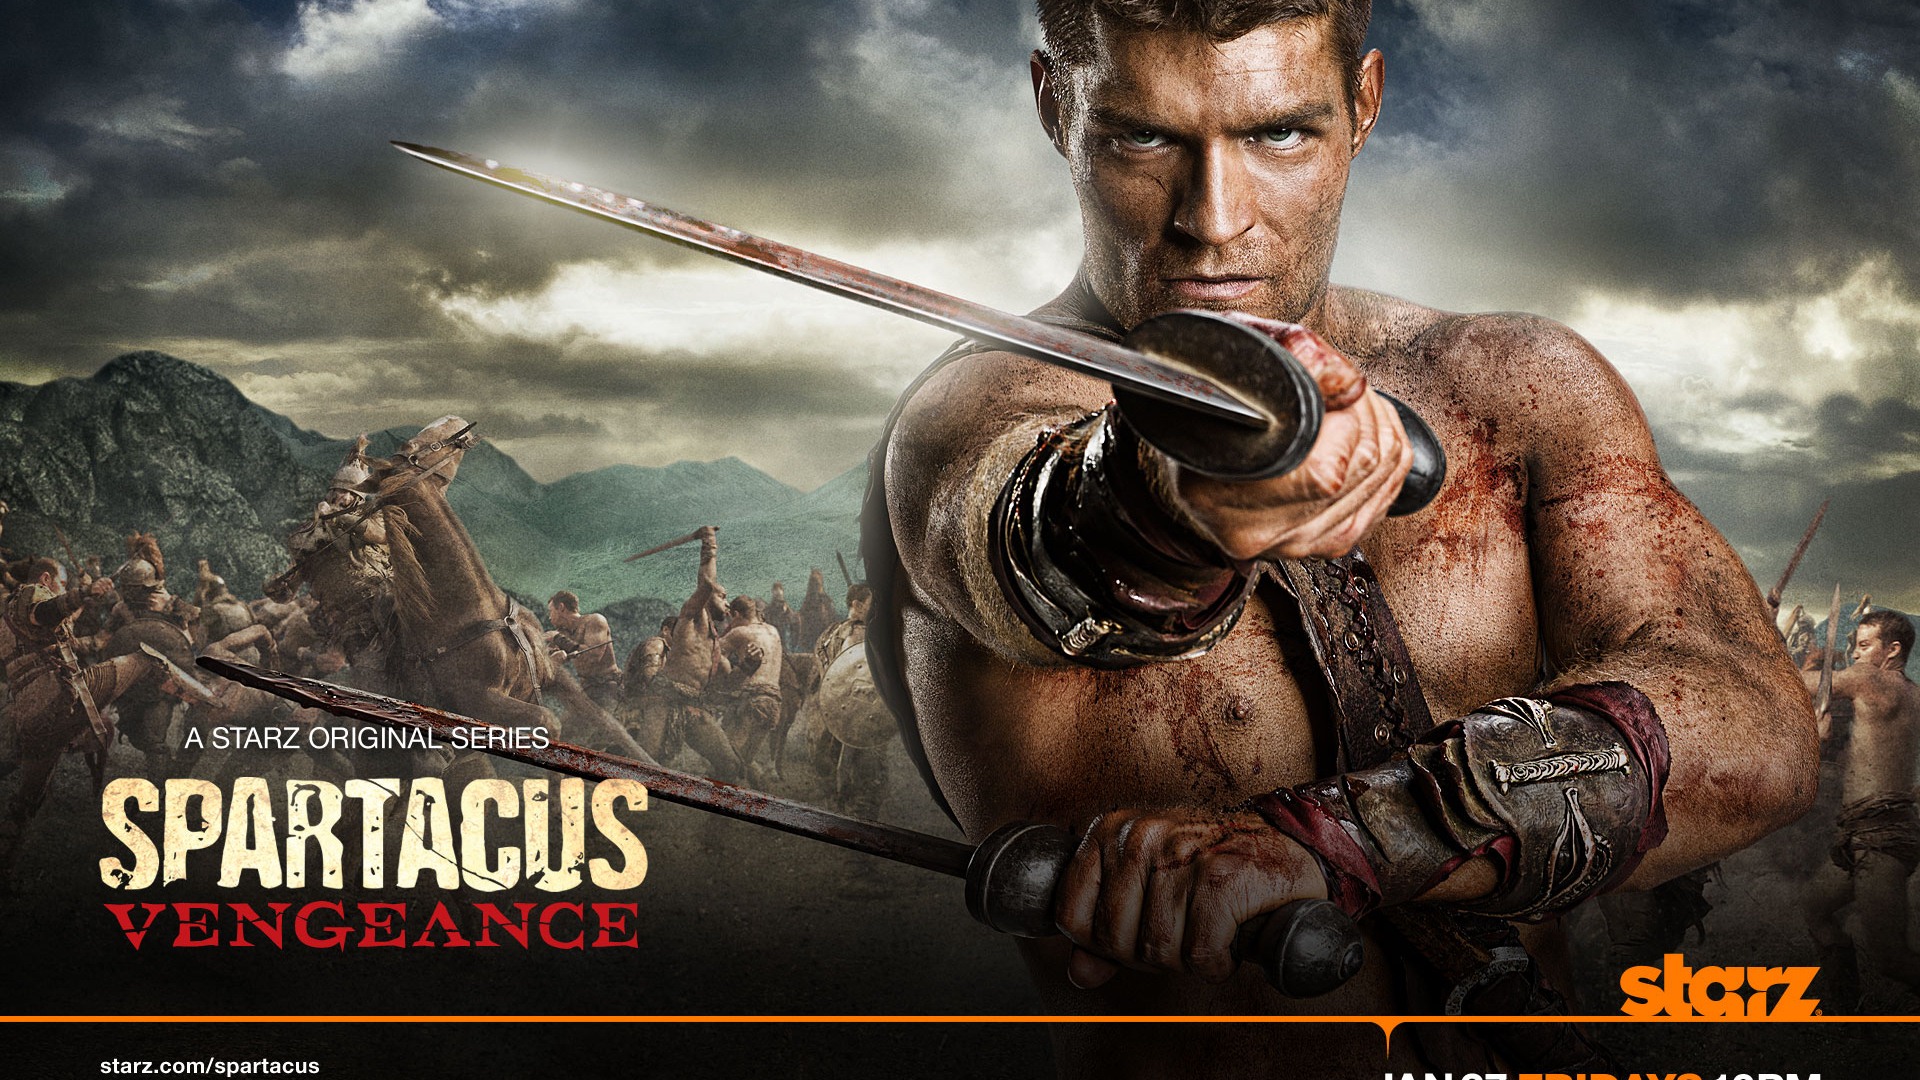 Spartacus: Vengeance HD wallpapers #1 - 1920x1080